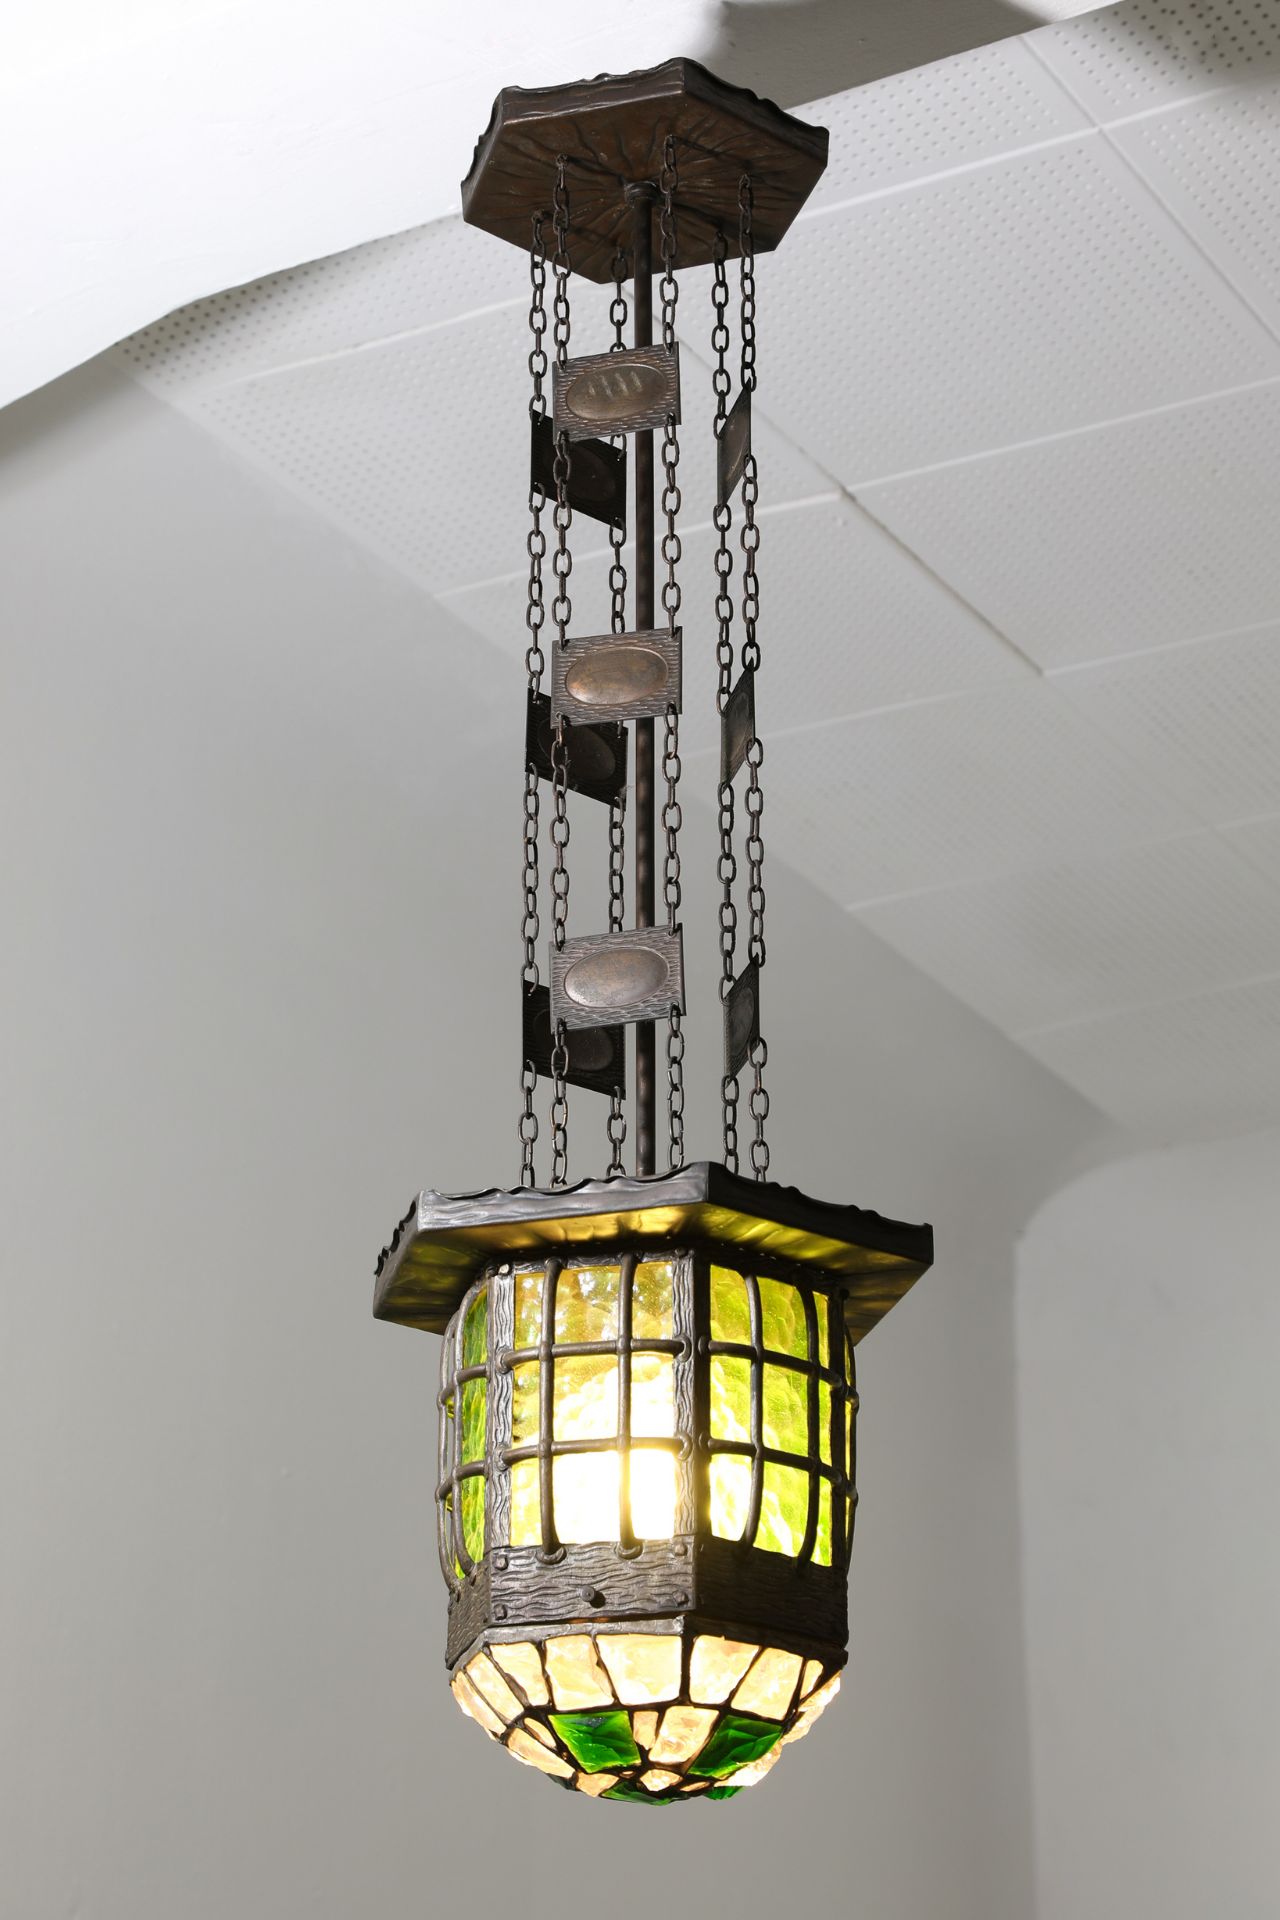 Art Nouveau hanging Lamp, metal, glass, probably Berlin around 1900